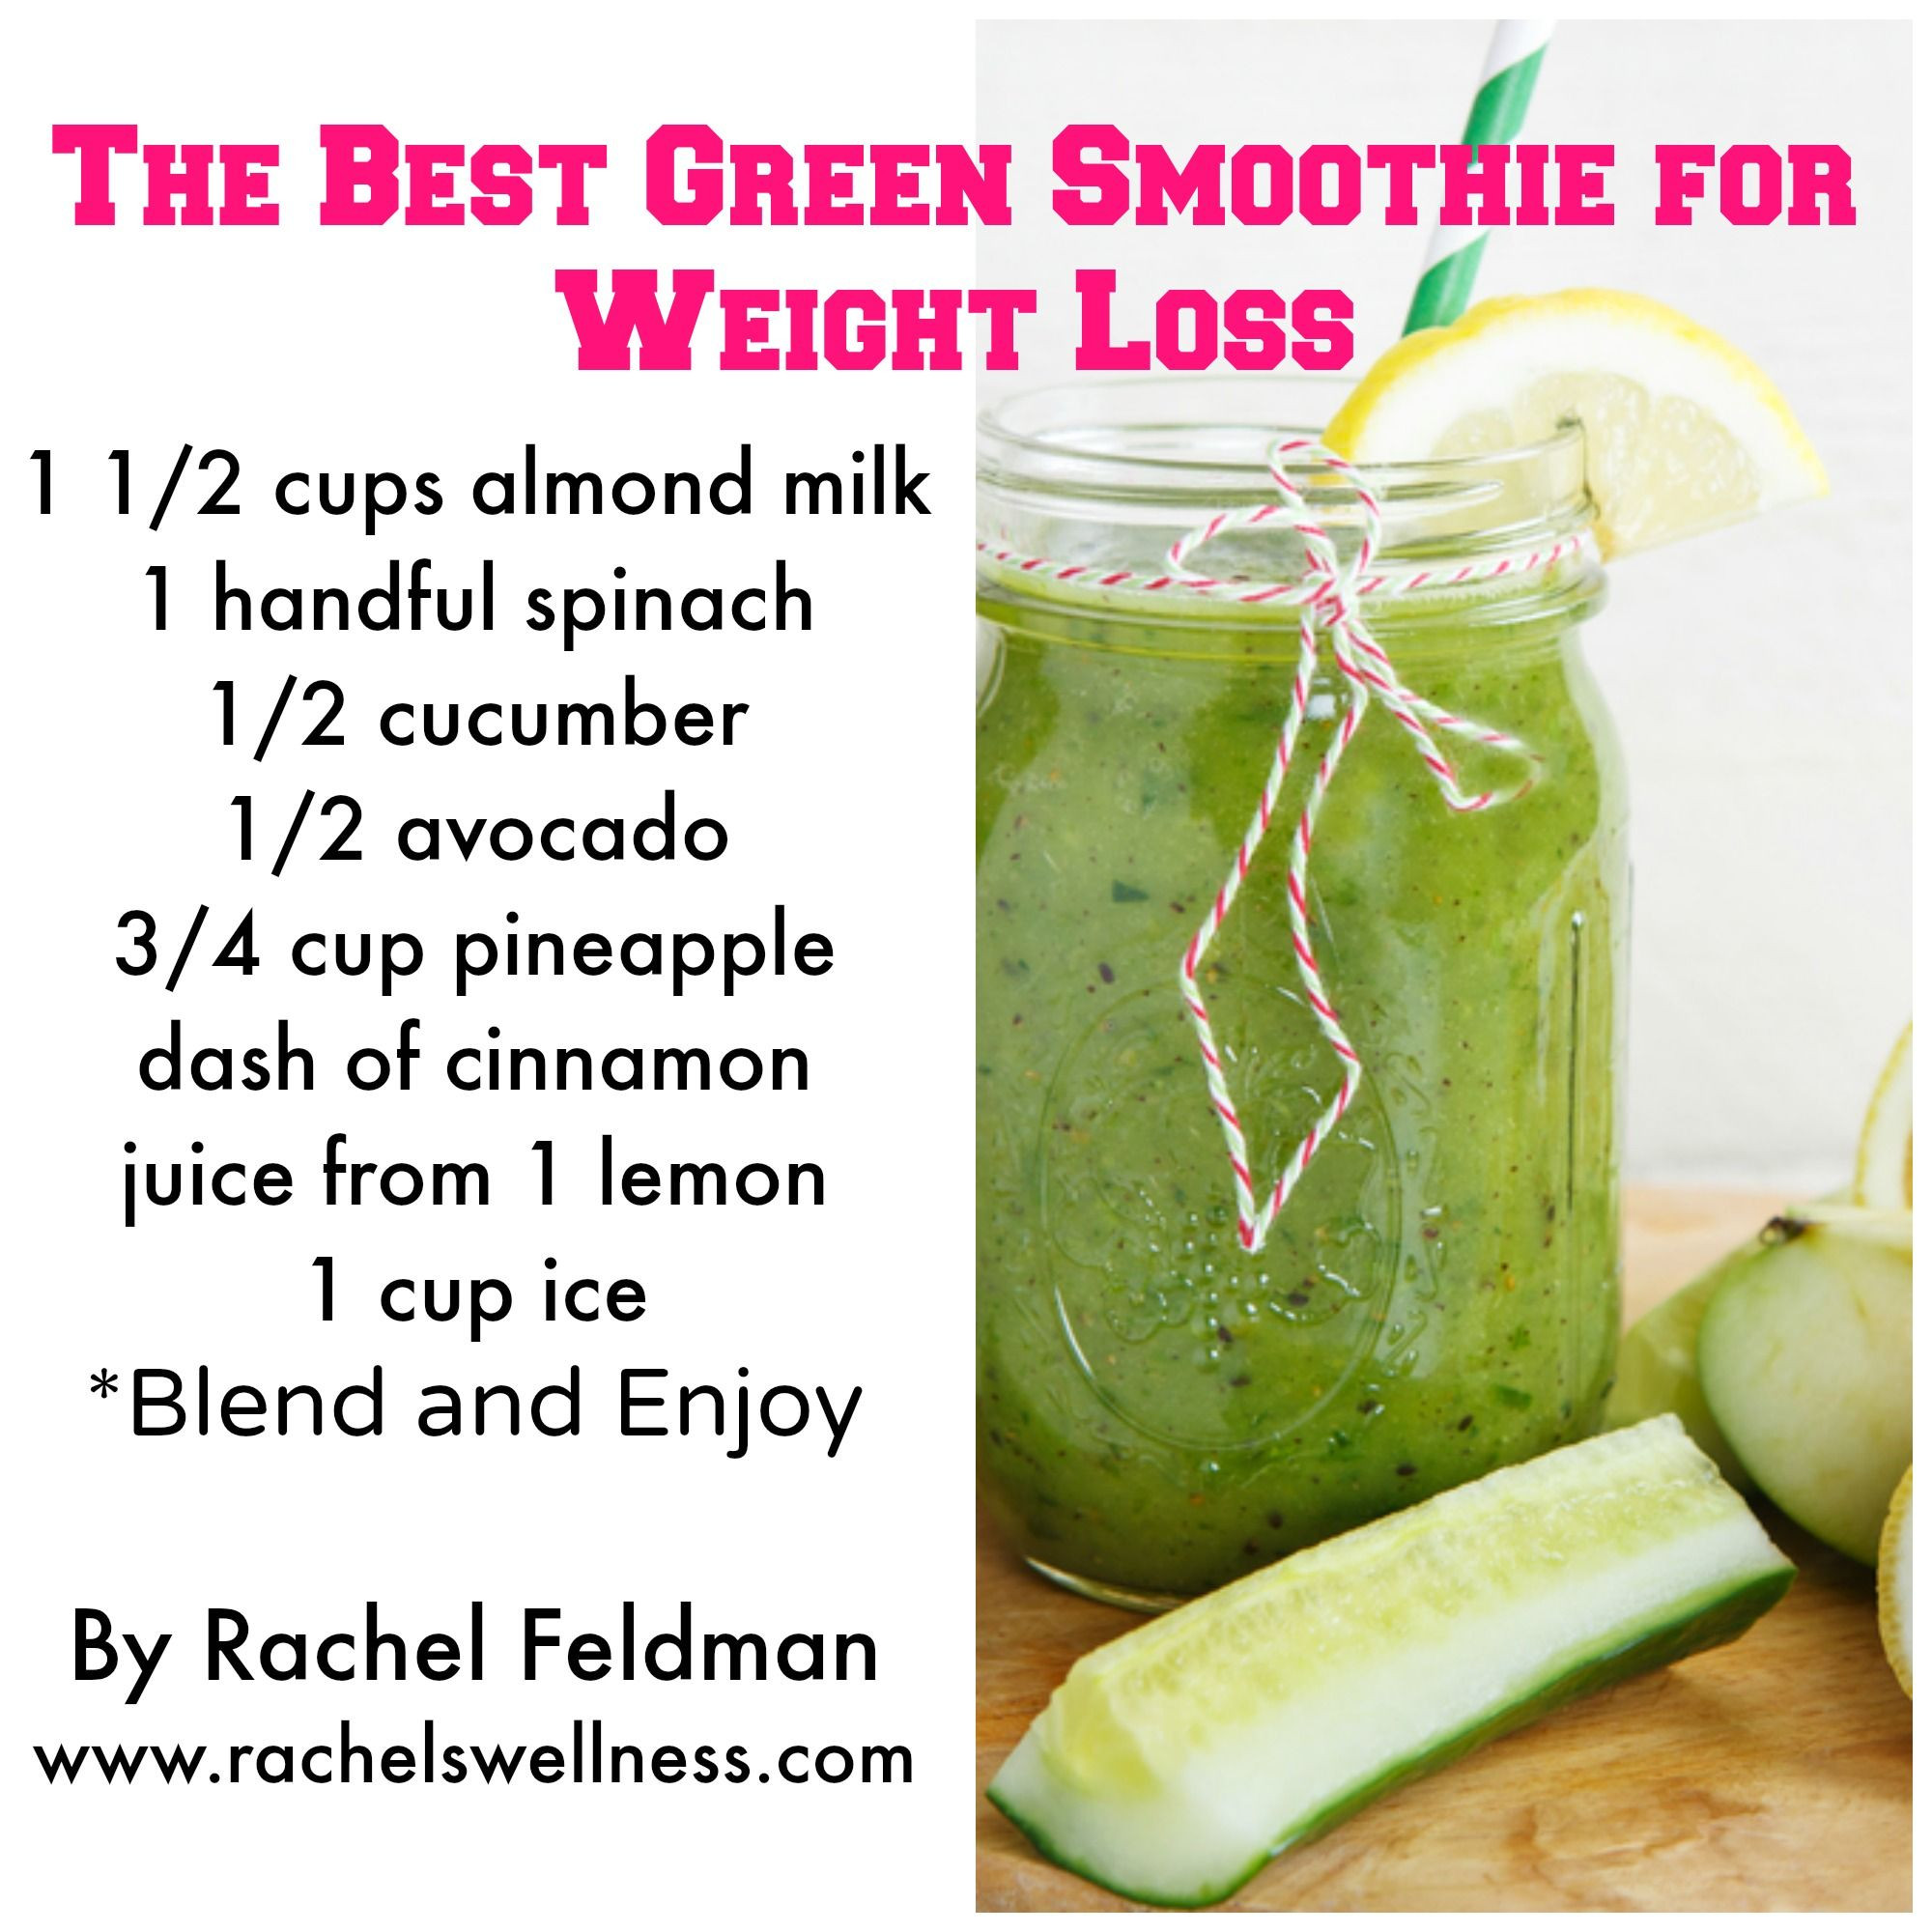 Healthy Weight Loss Smoothies
 7 Healthy Green Smoothie Recipes For Weight Loss